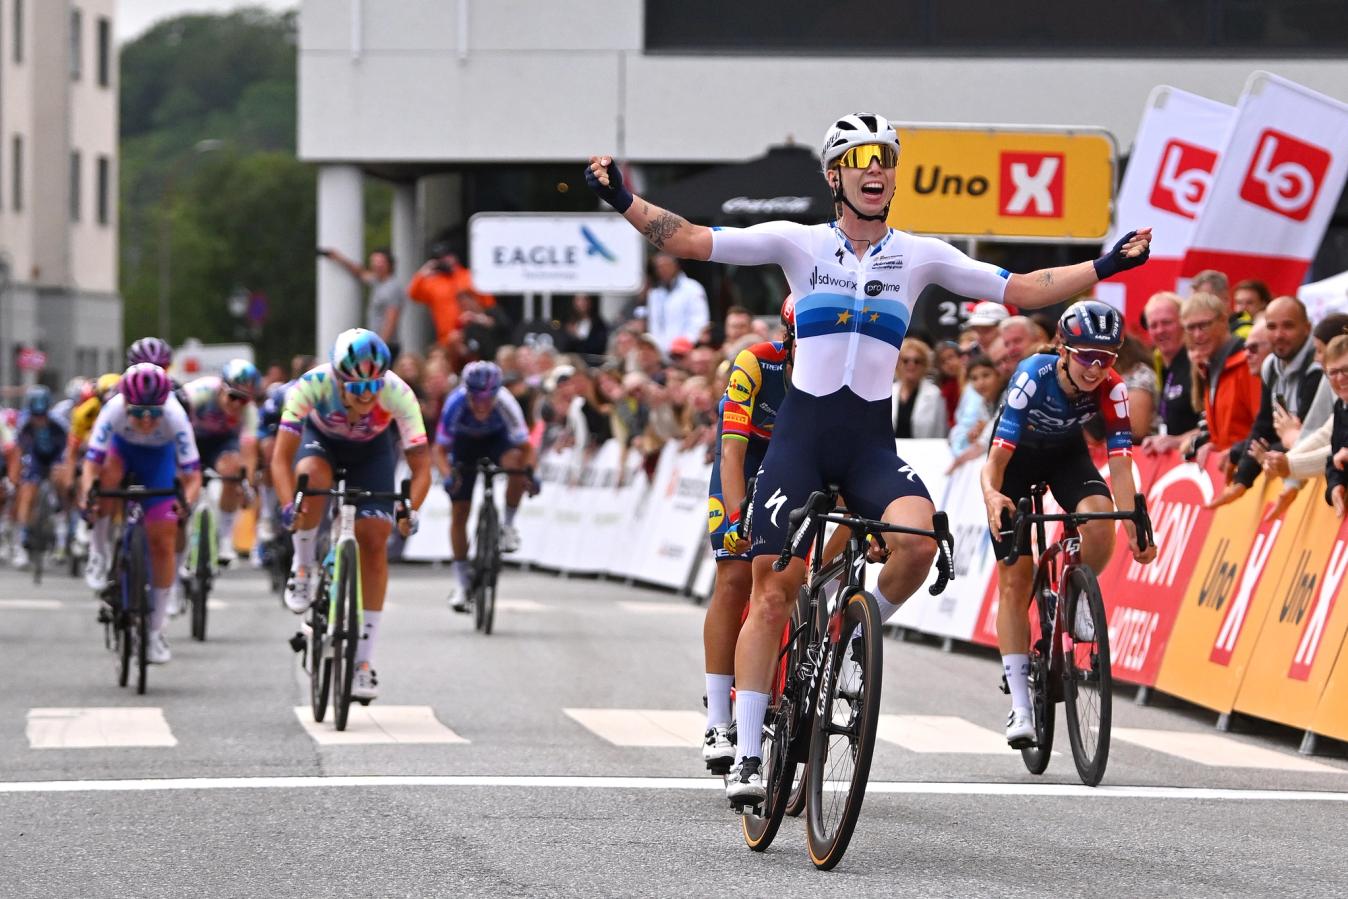 Lorena Wiebes (SD Worx) sprinted to victory on stage 1 of the Tour of Scandinavia